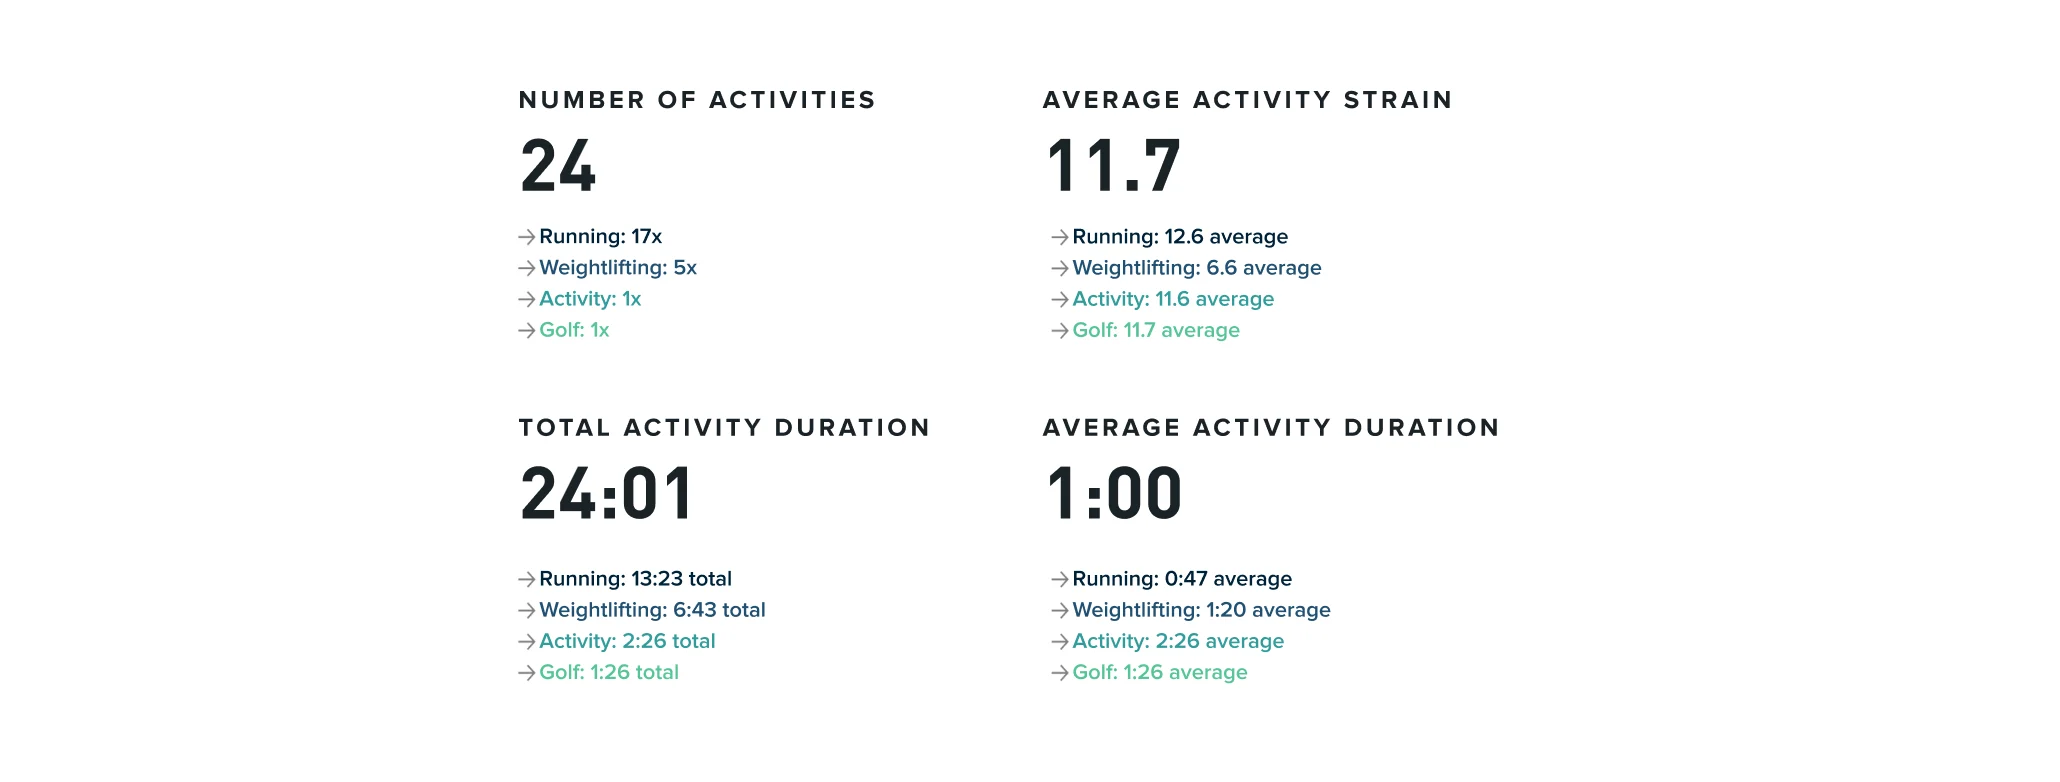 activities summary with strain and duration